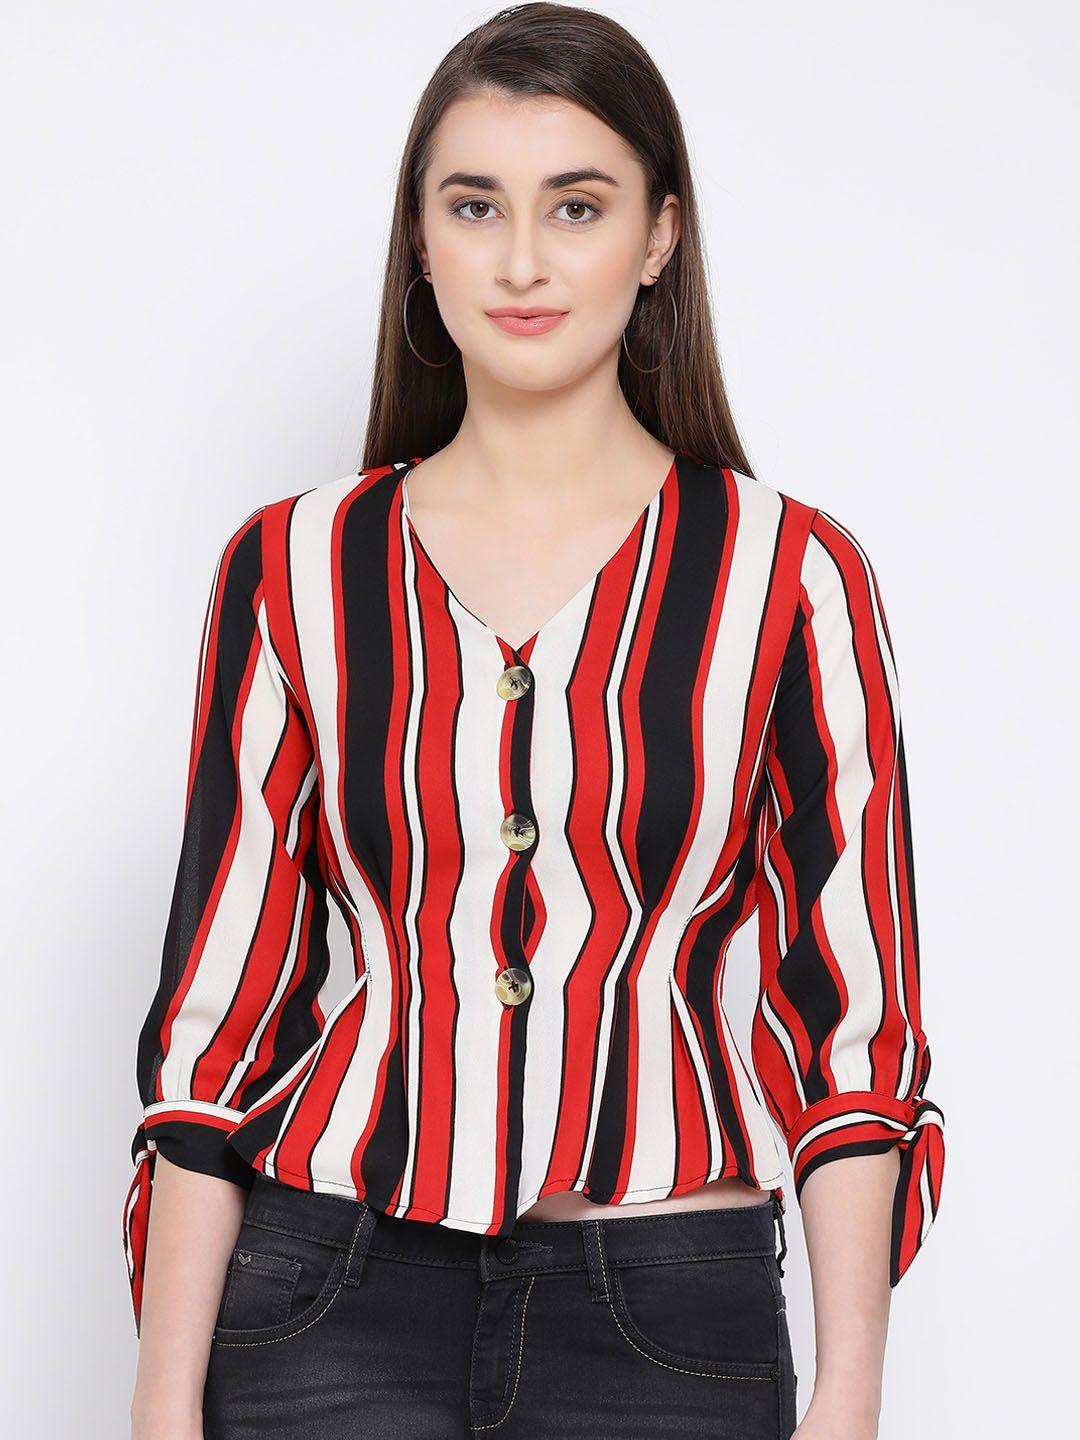 oxolloxo women red candy striped cinched waist top